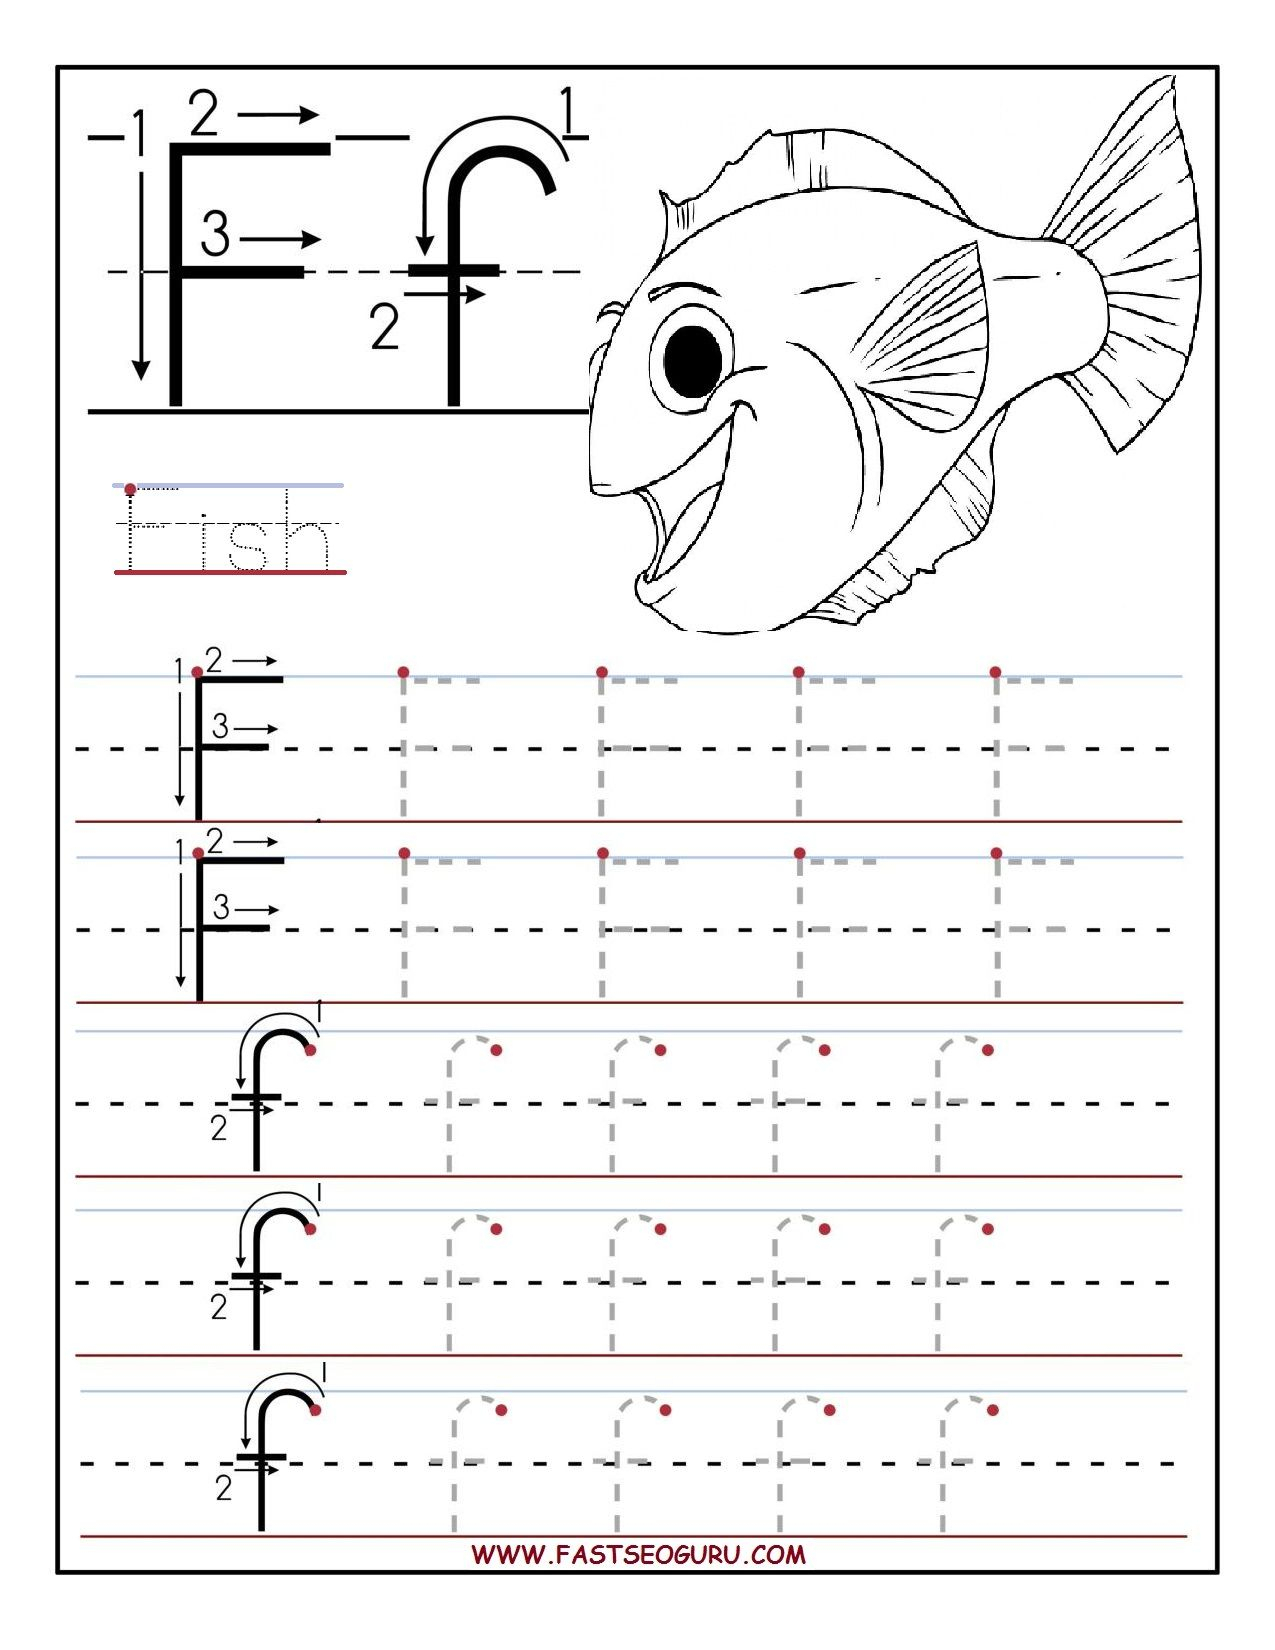 Printable Letter F Tracing Worksheets For Preschool regarding Letter F Tracing Preschool